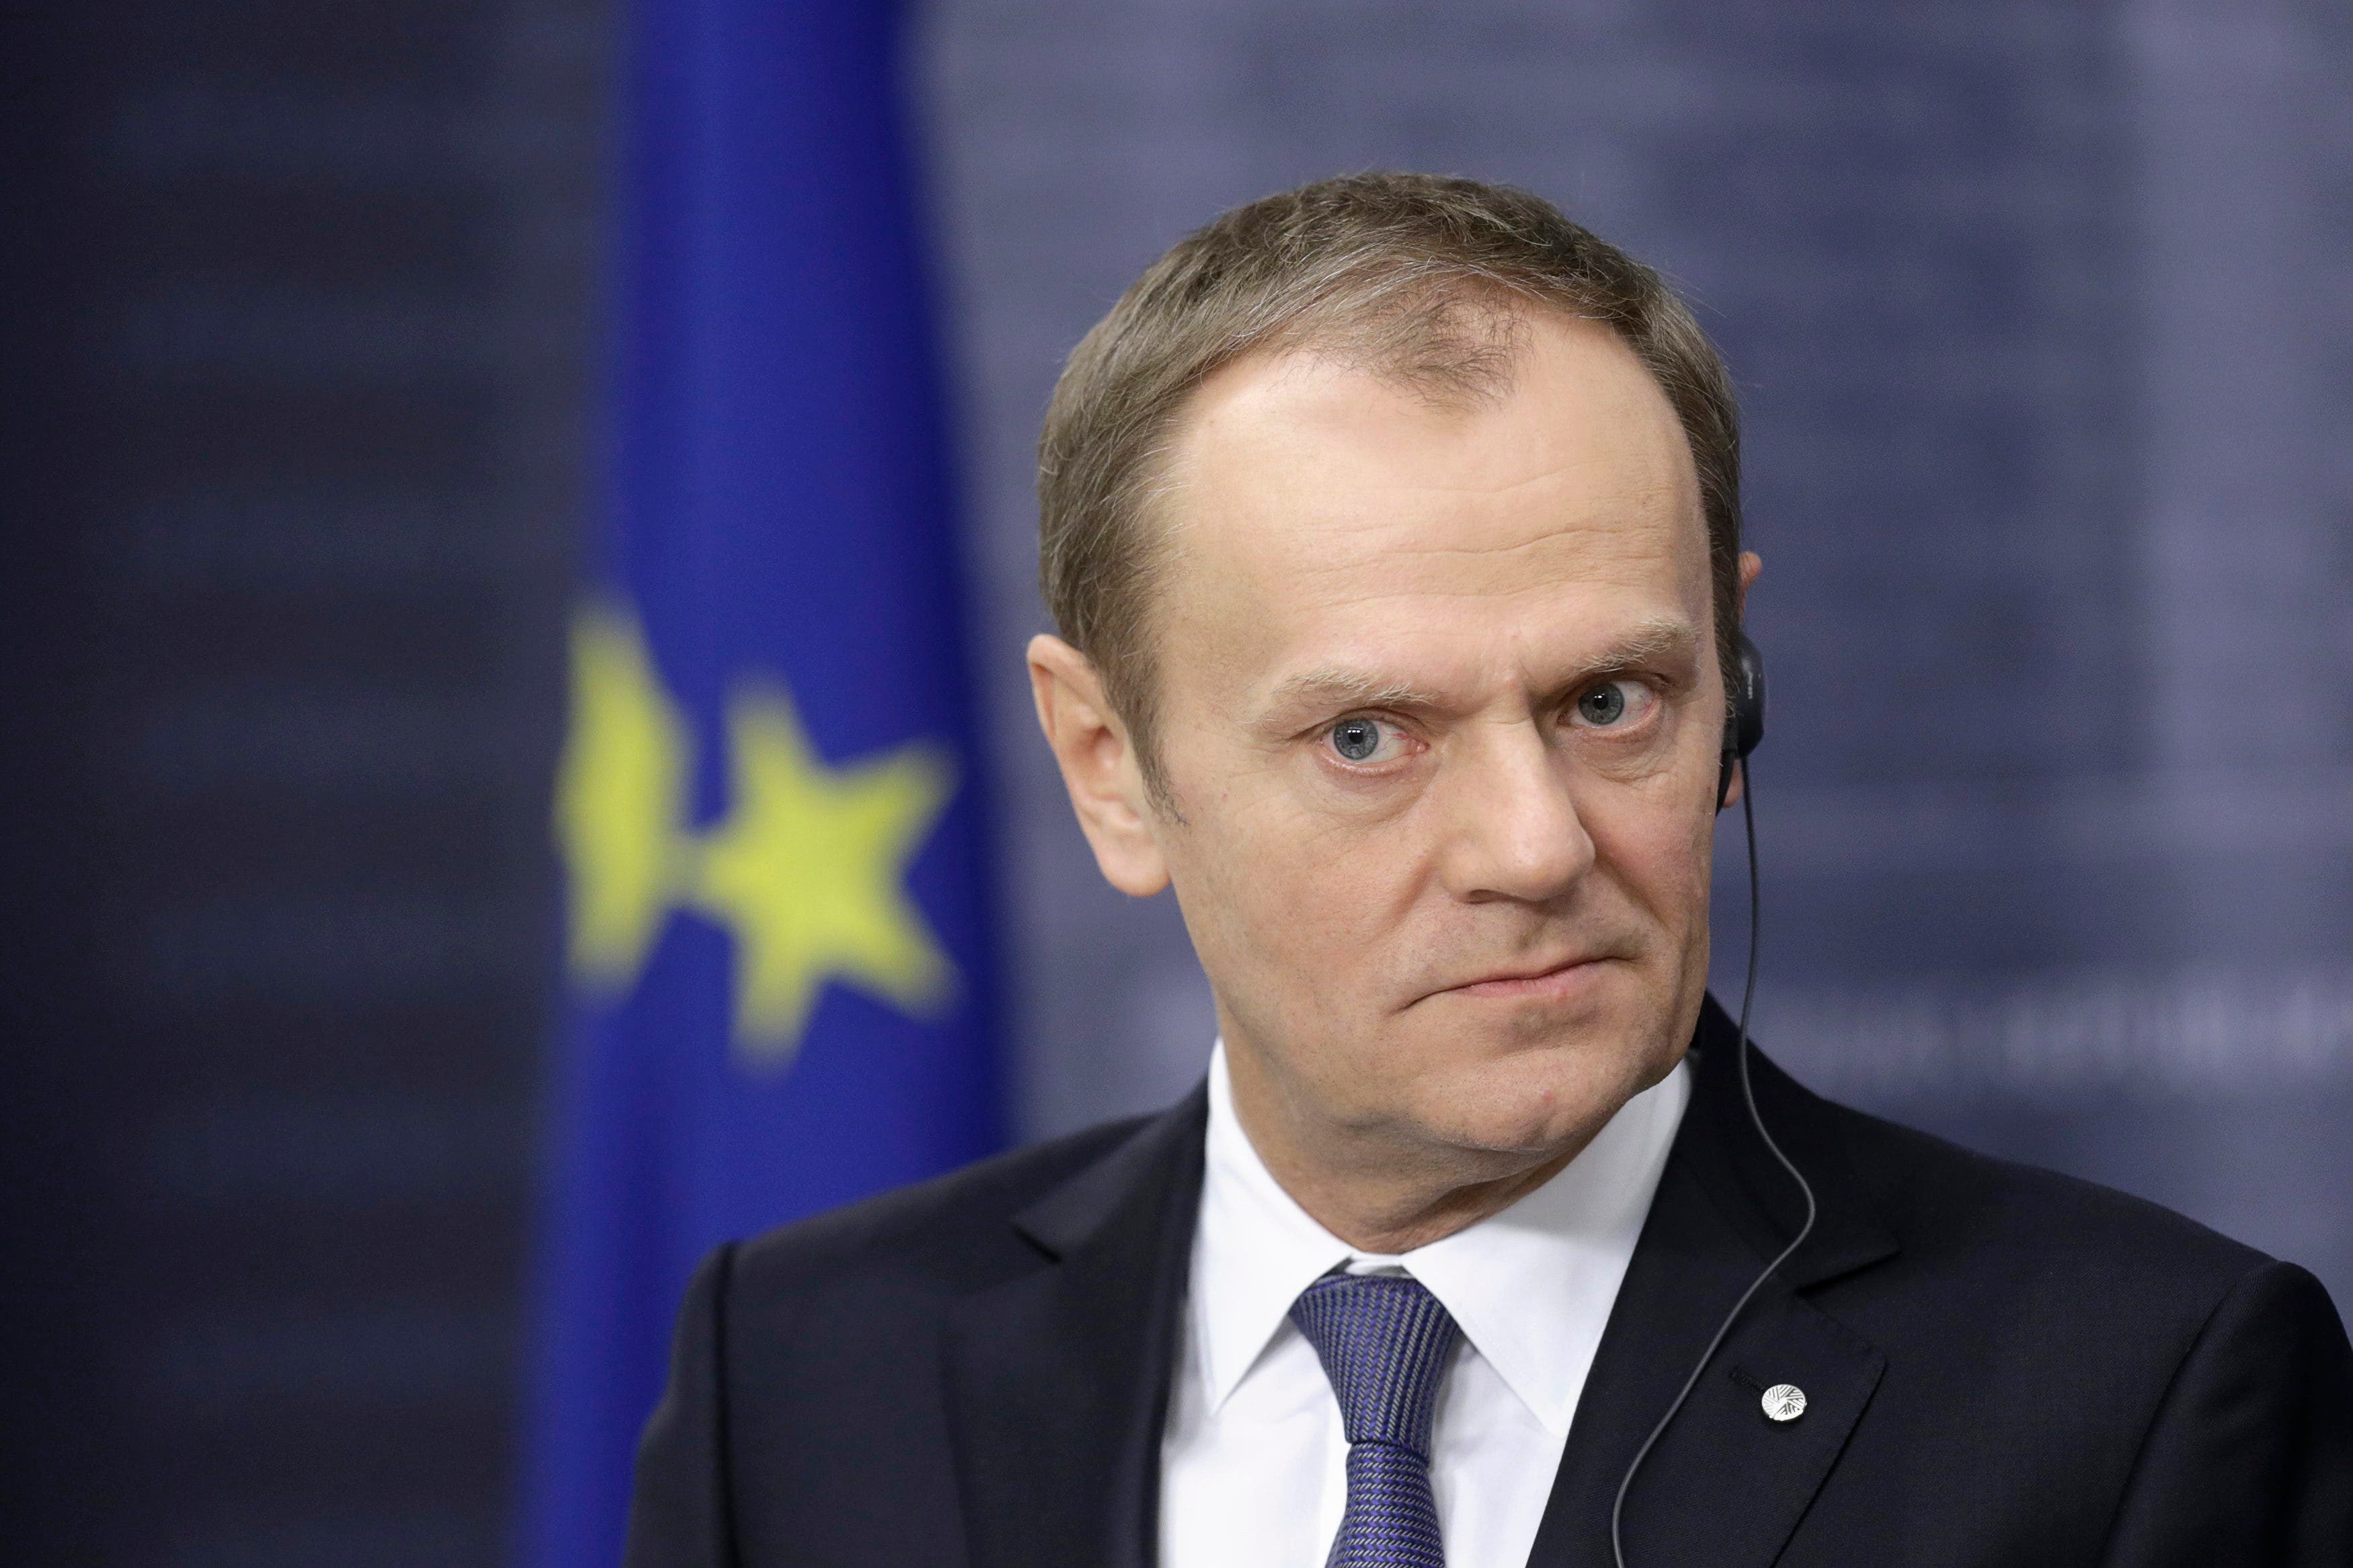 European Council President Donald Tusk listens during a news conference in Riga January 9, 2015. (Reuters)